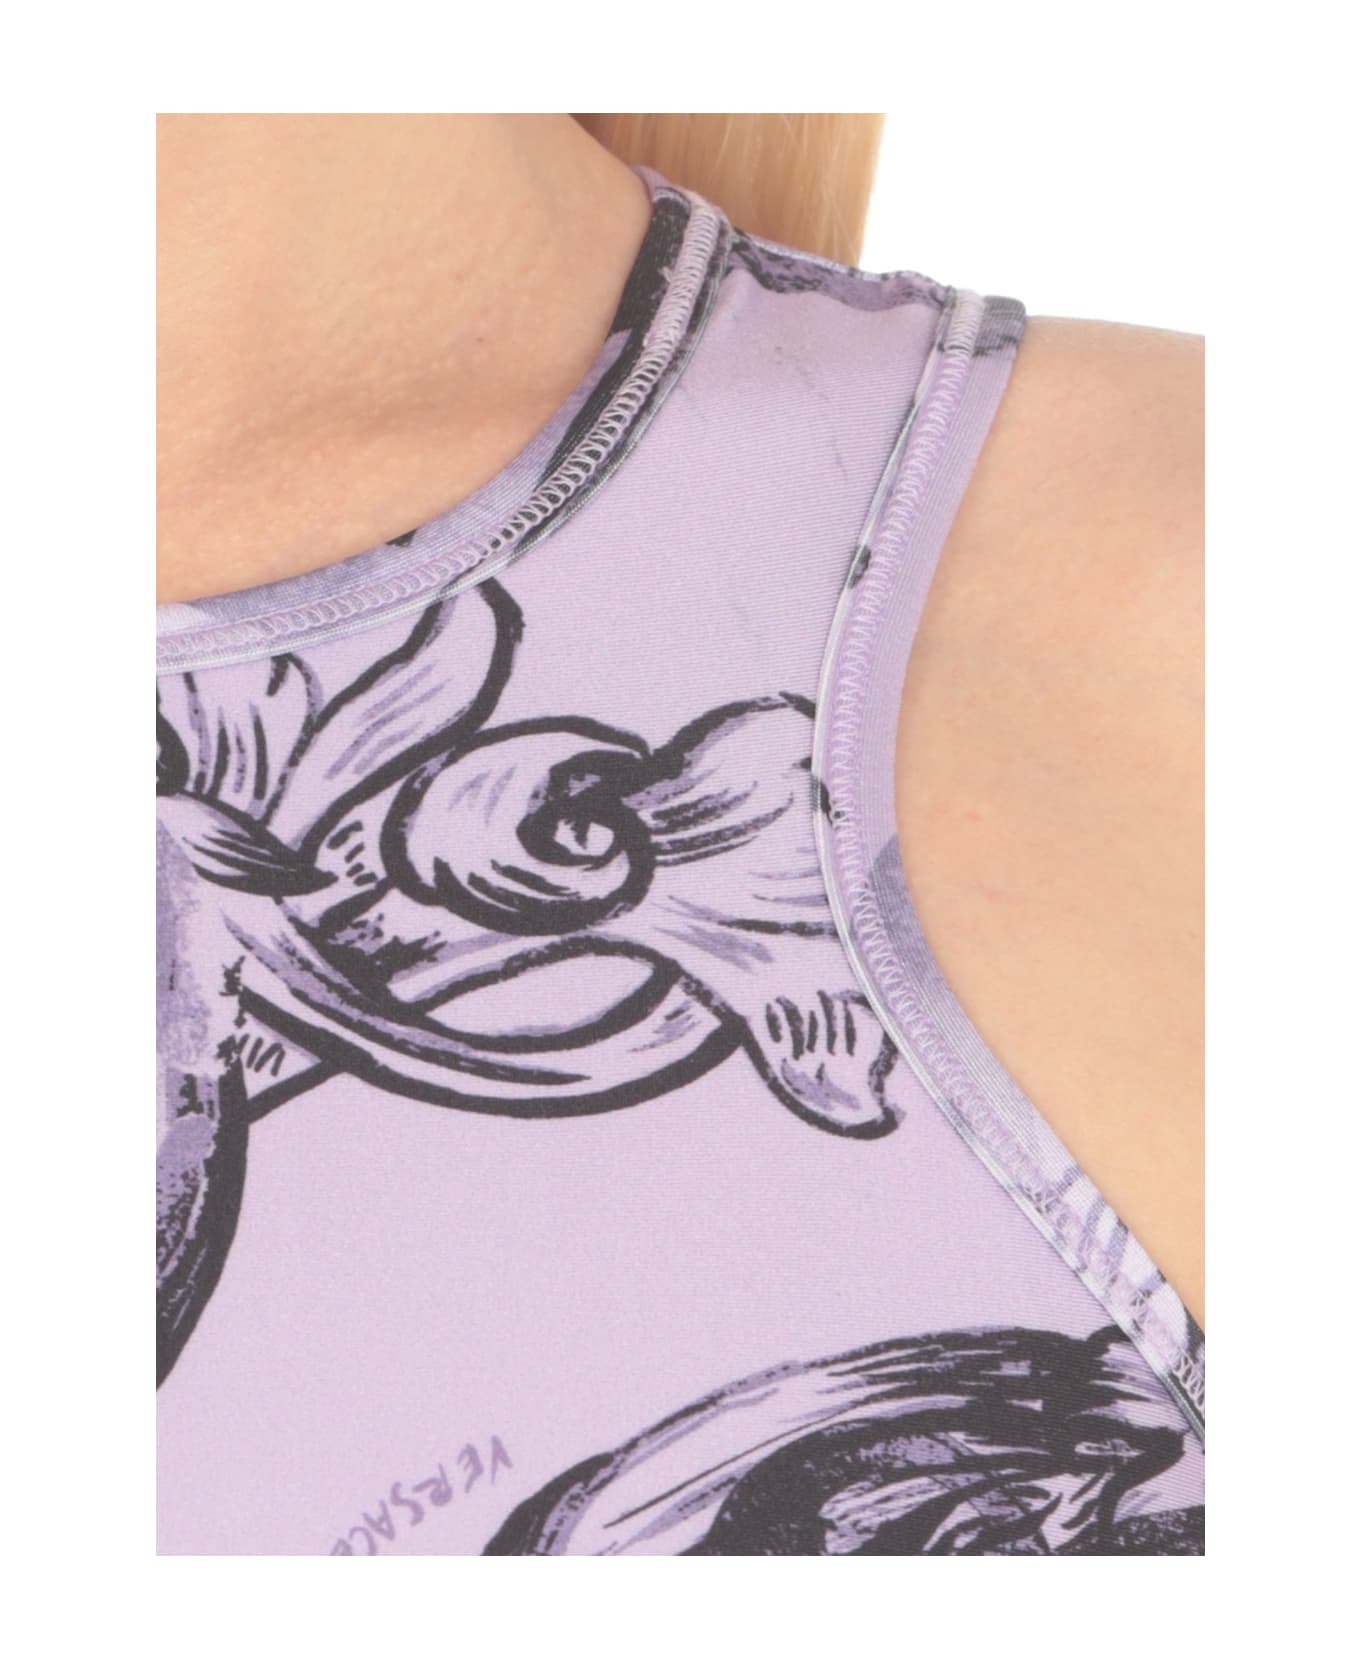 Versace Jeans Couture Watercolour Couture Top - Purple タンクトップ